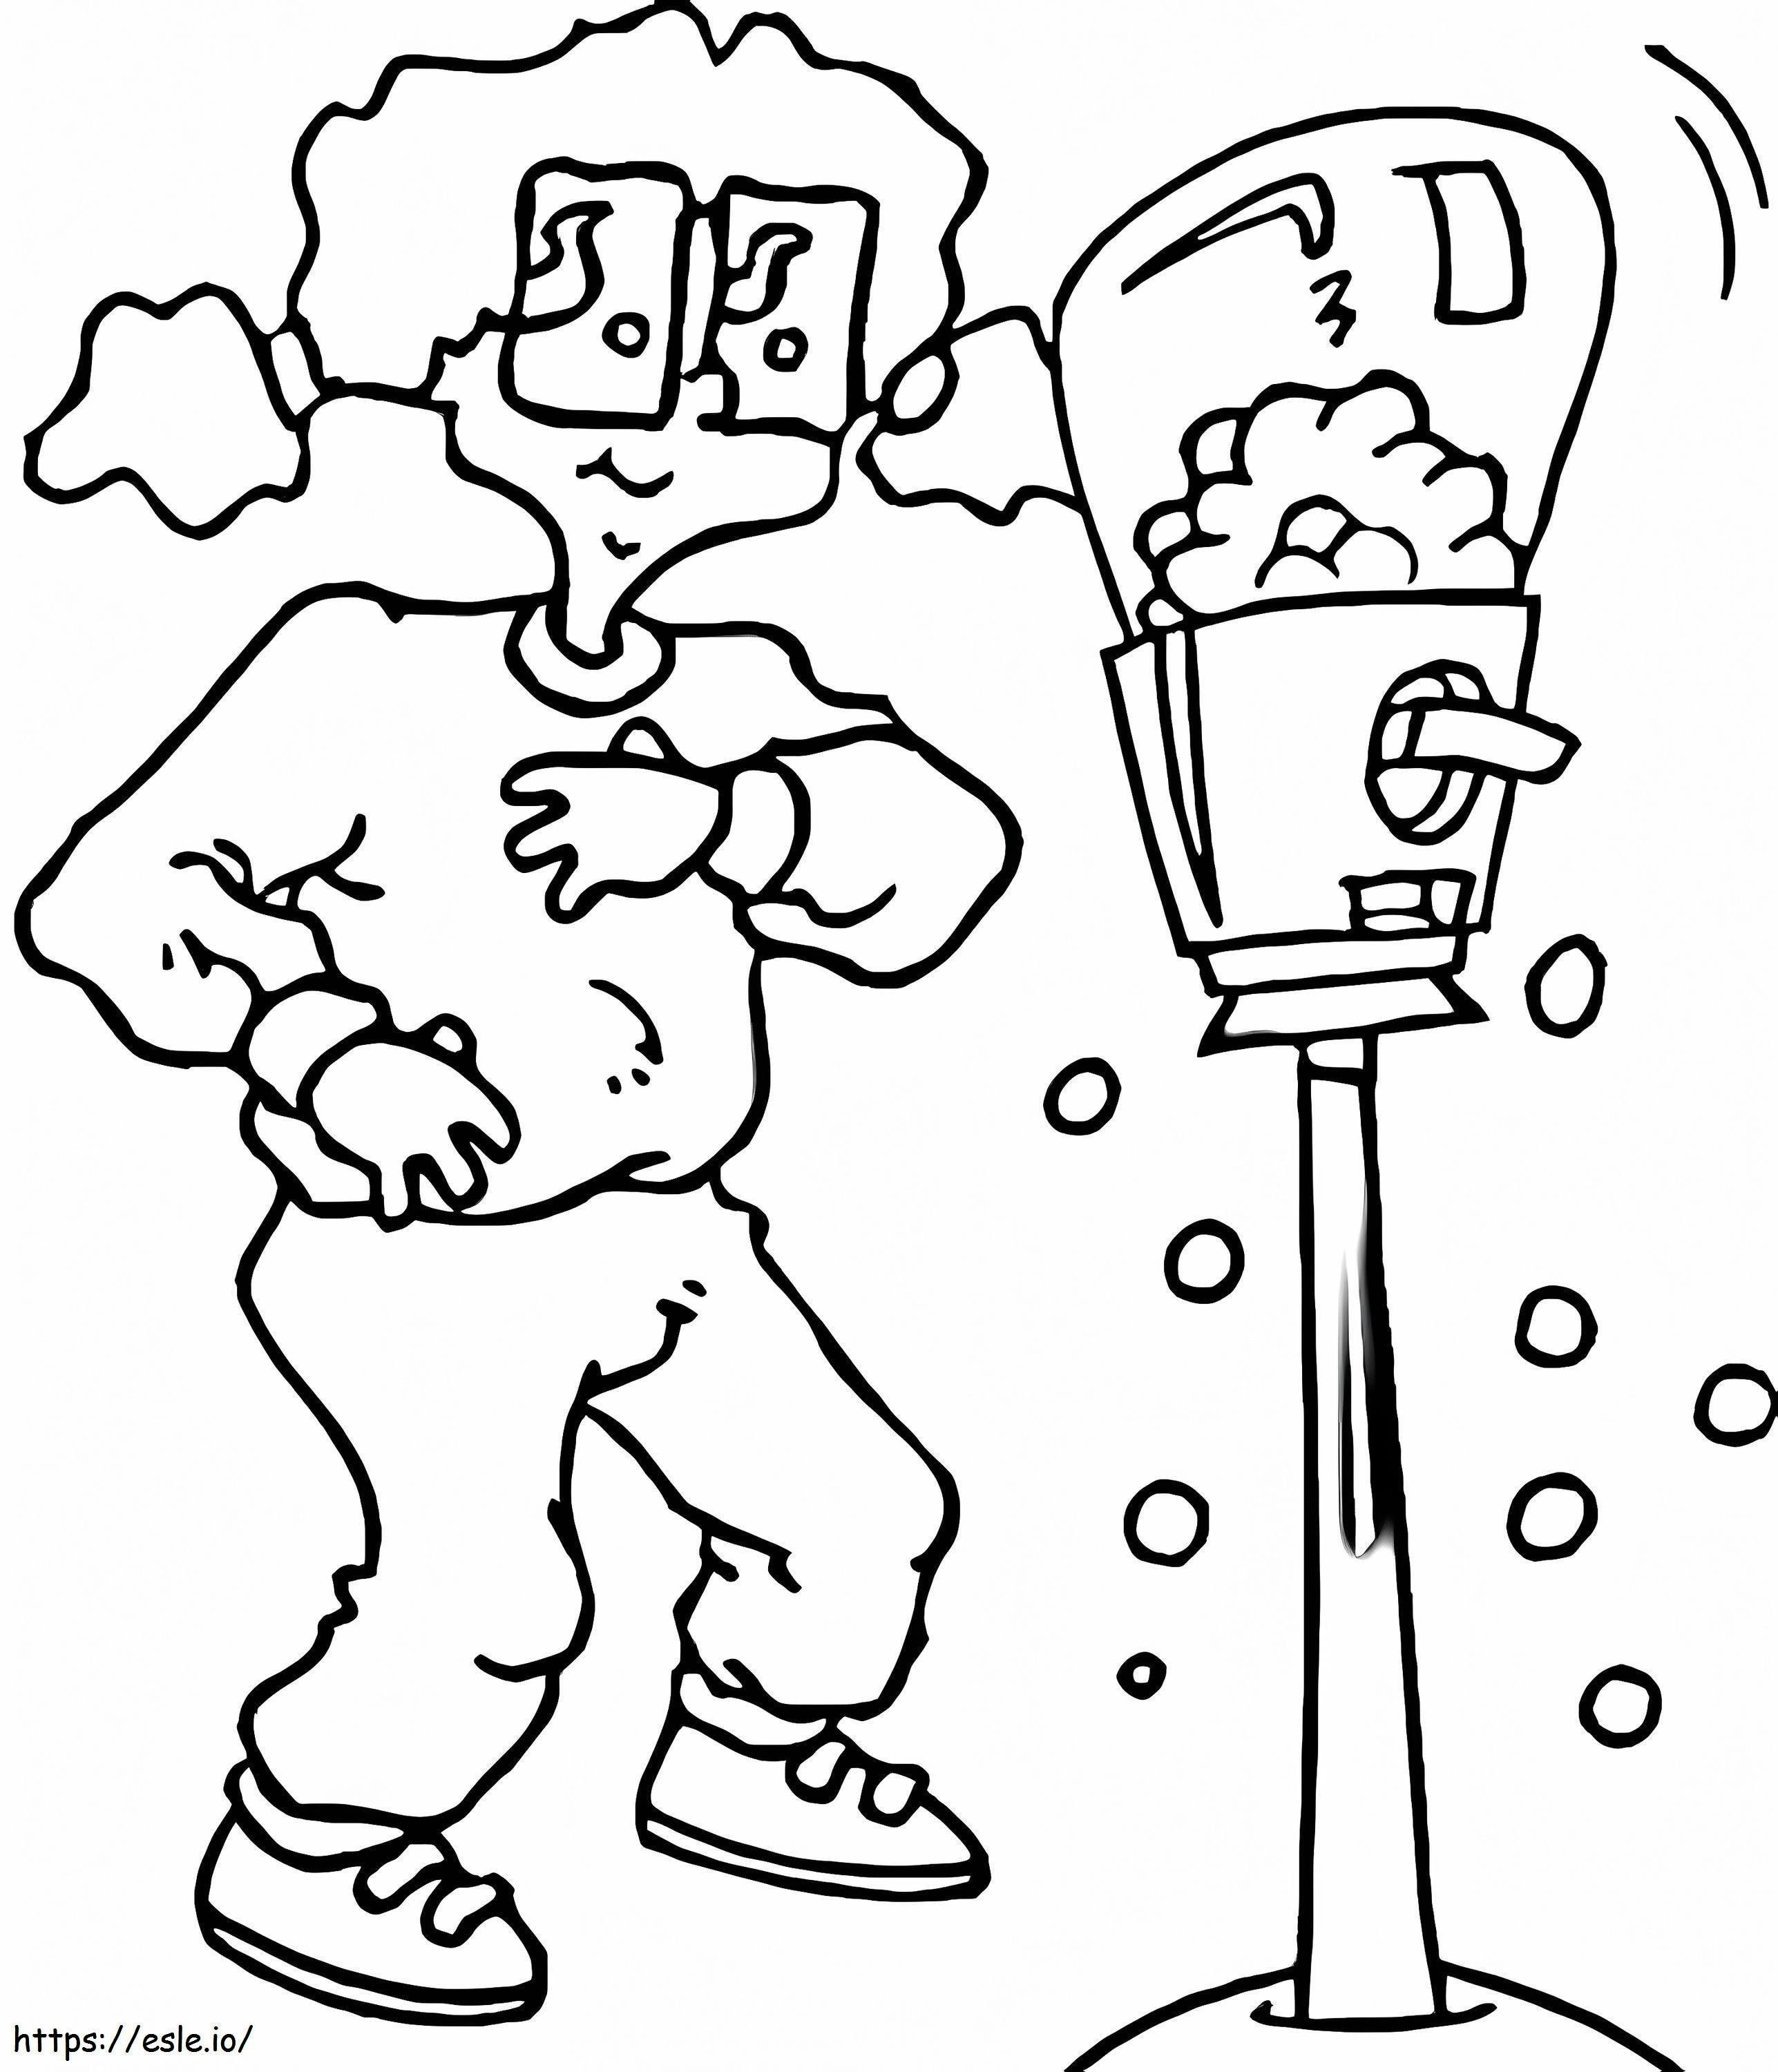 Gumball Machine coloring page